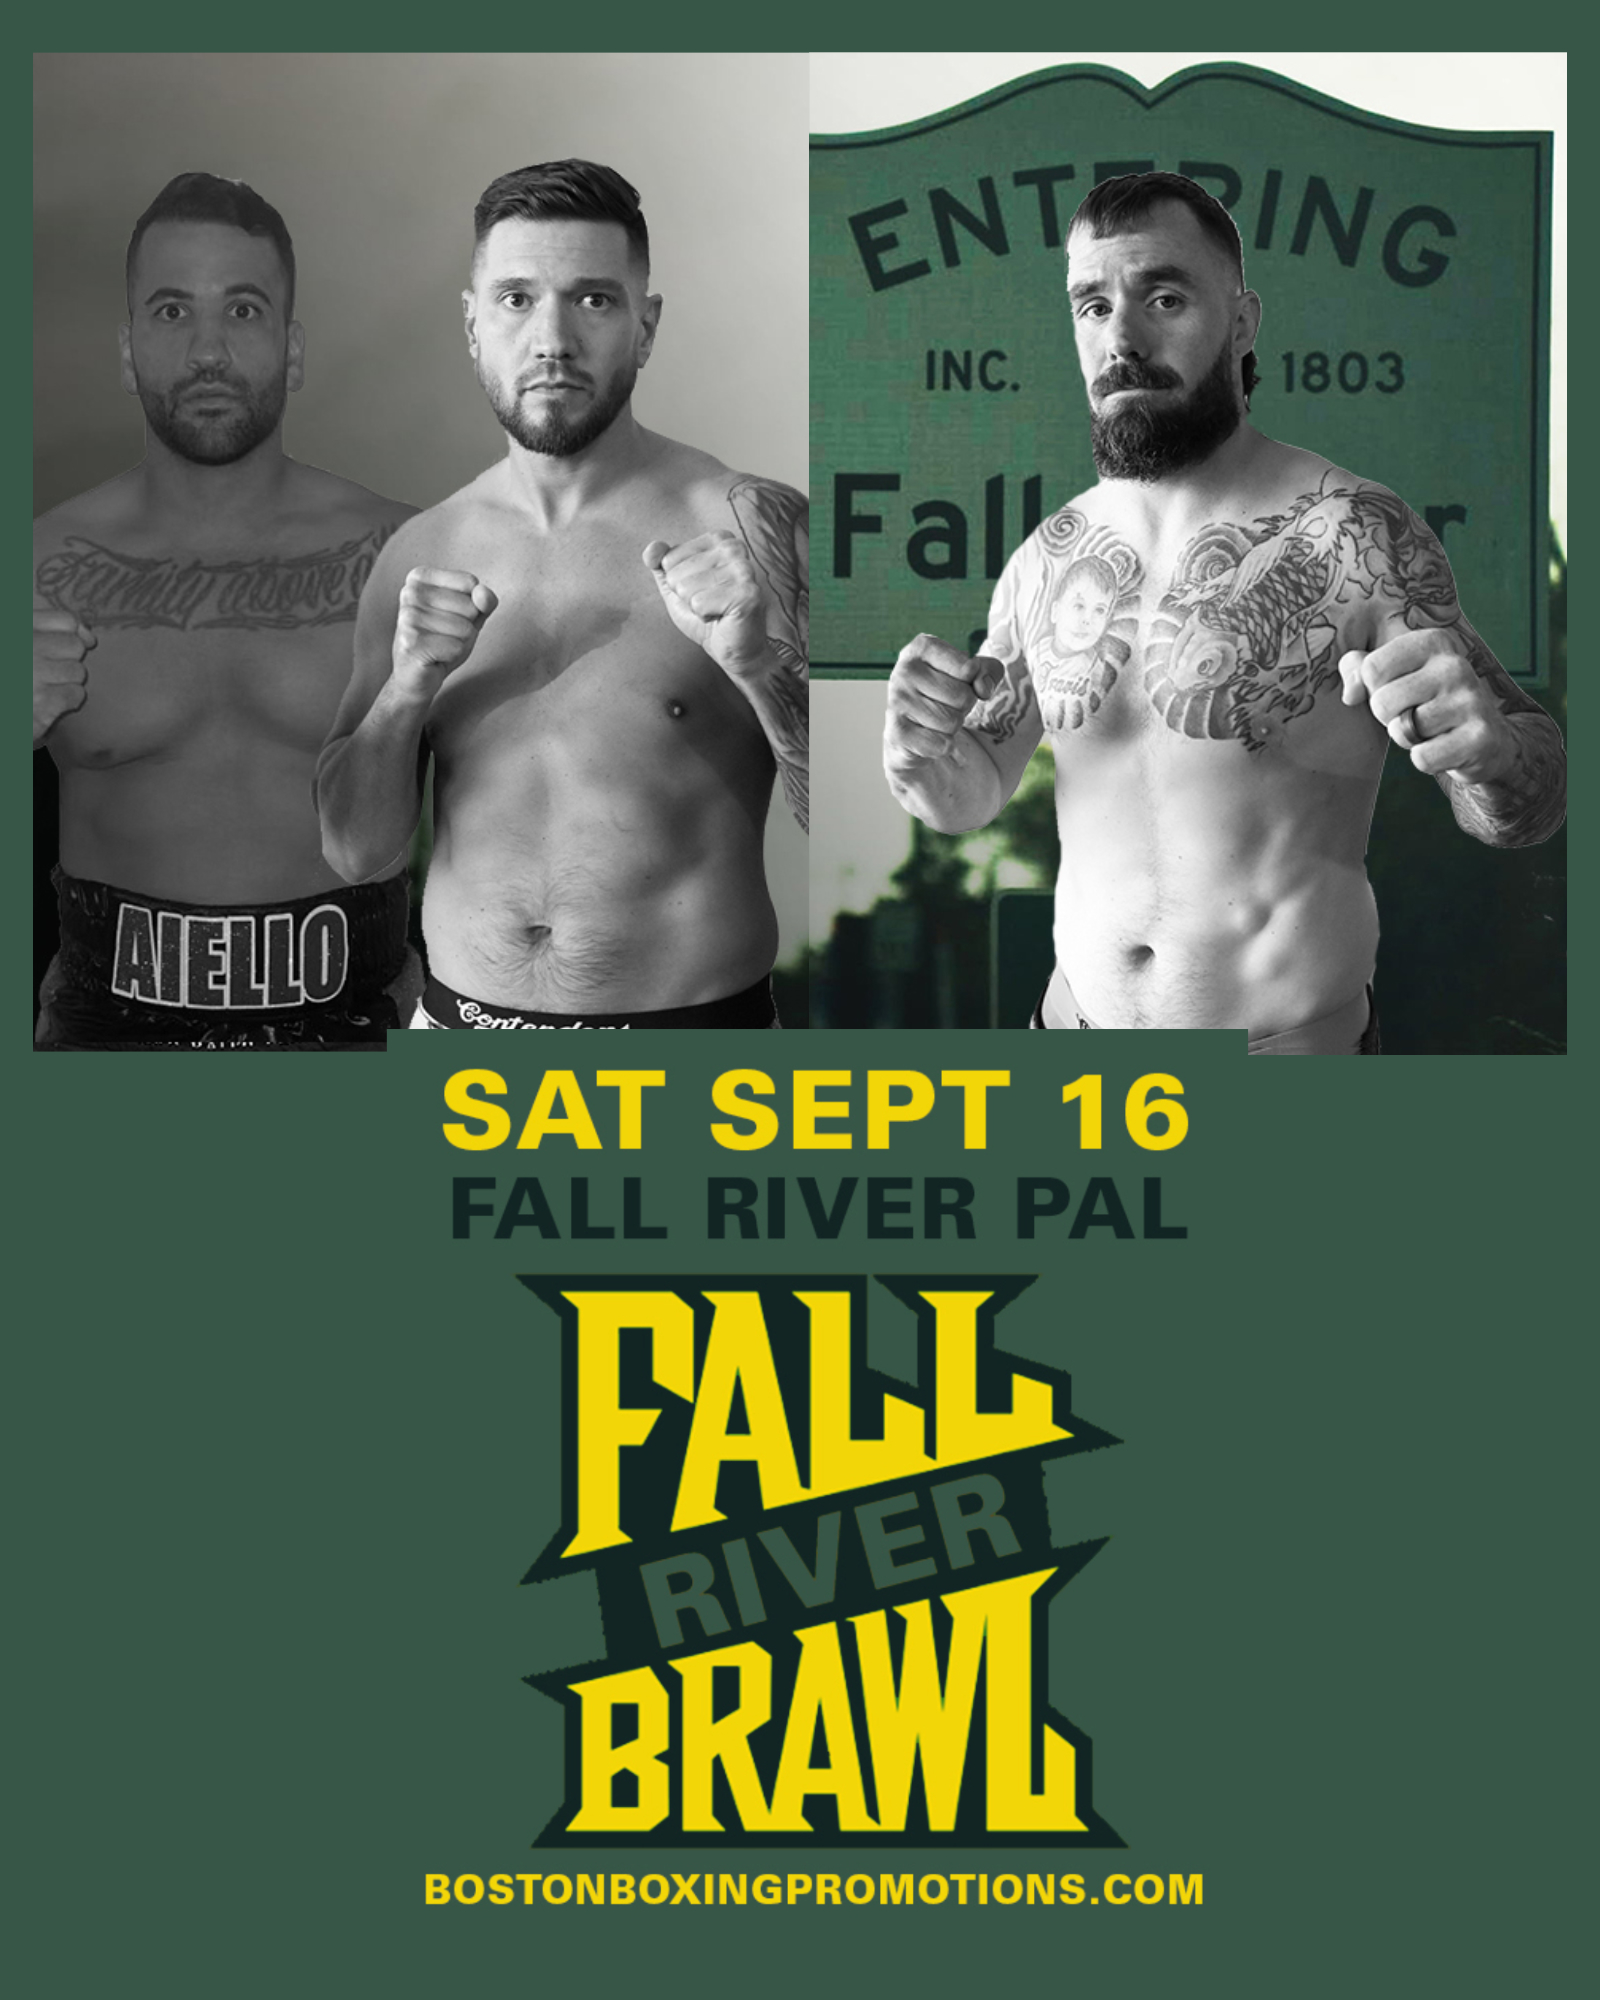 Watch BBP Fall River Brawl on Combat Sports Now